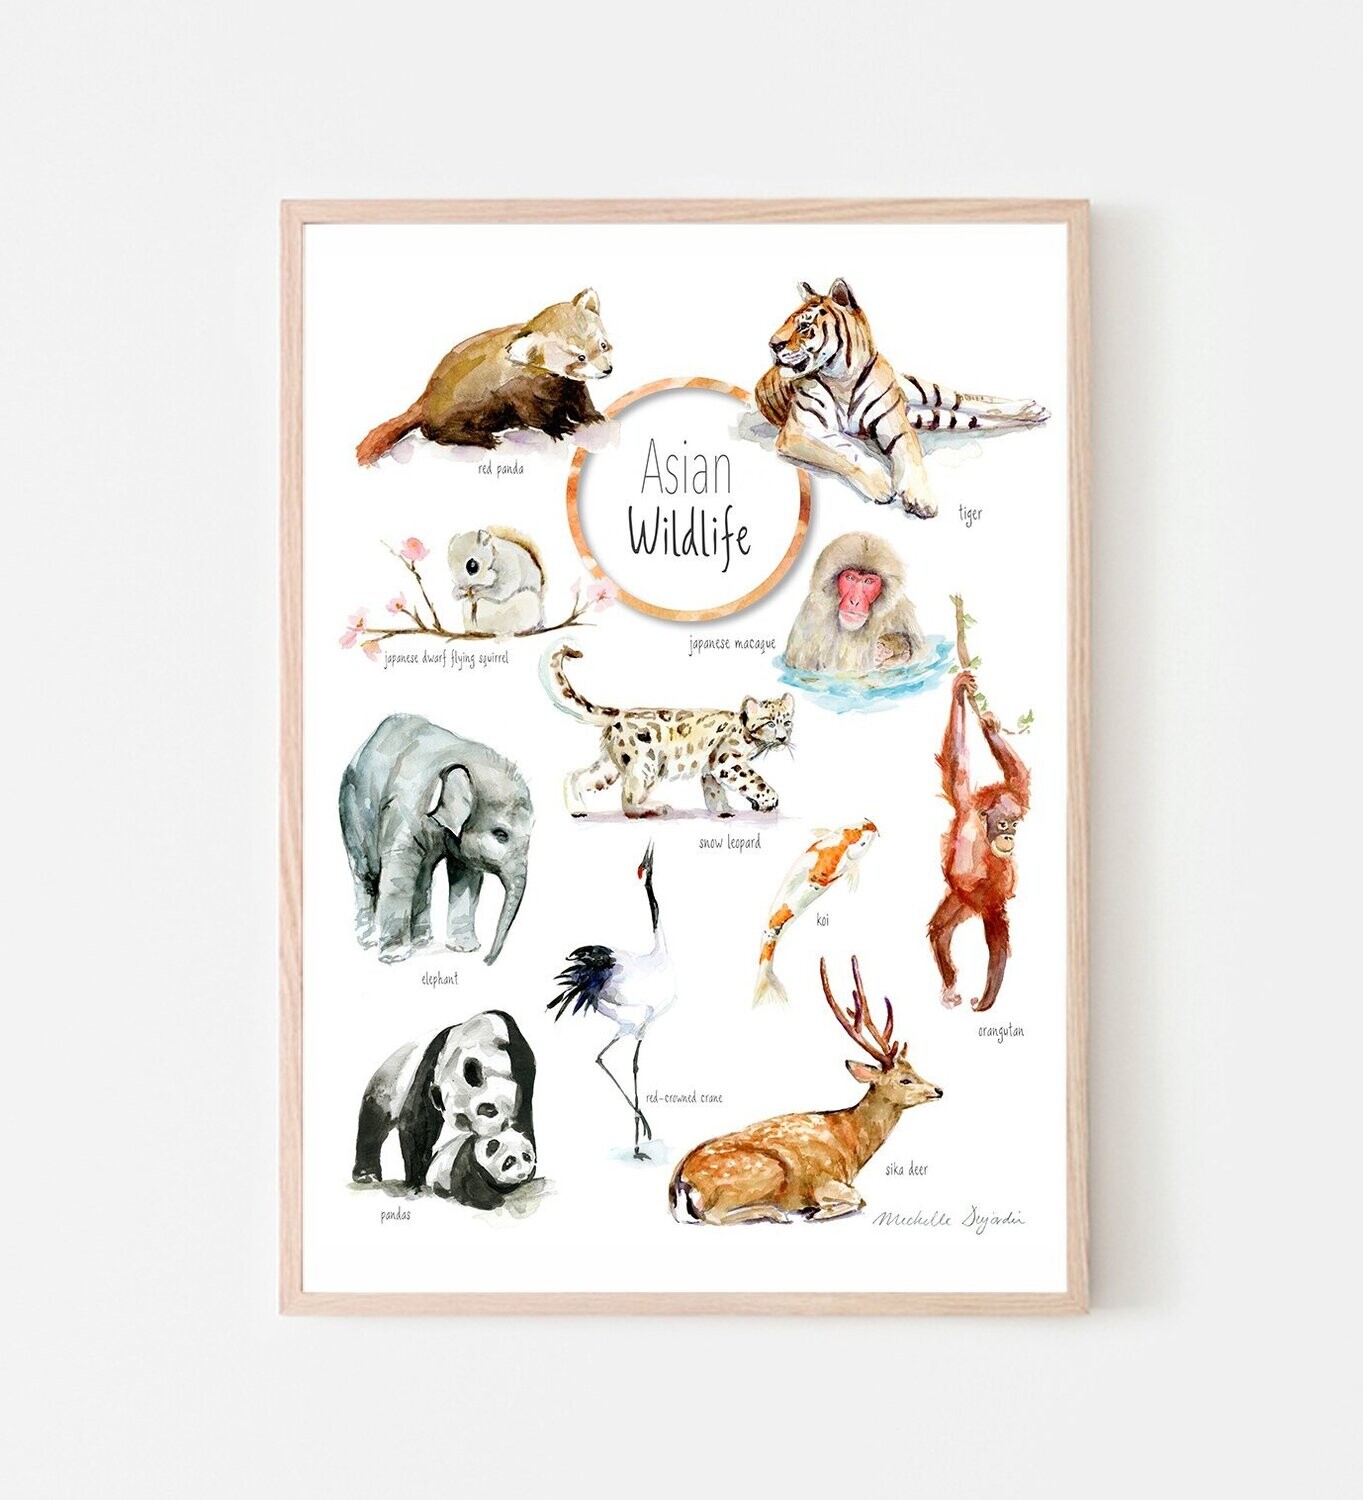 Asian animal species watercolor illustration poster